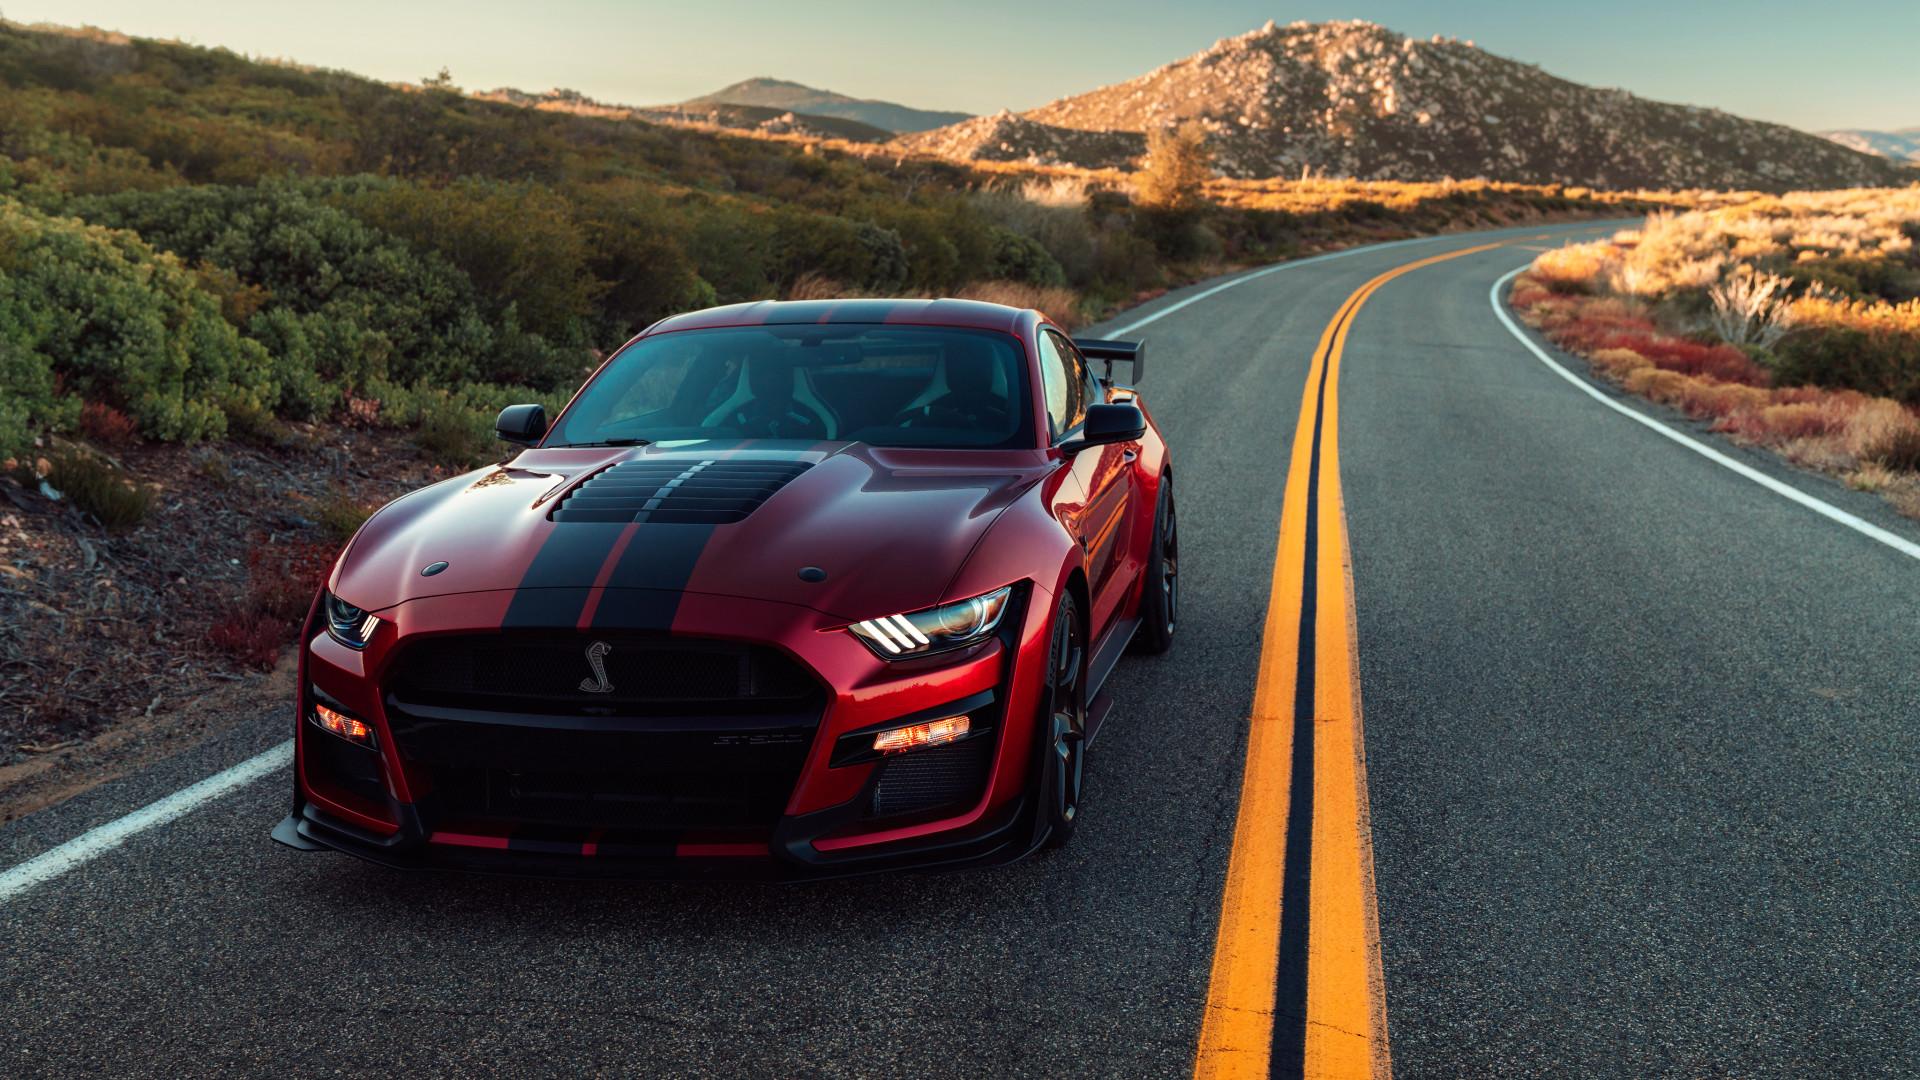 1920x1080 2020 Ford Mustang Shelby GT500 4k Laptop Full HD 1080P